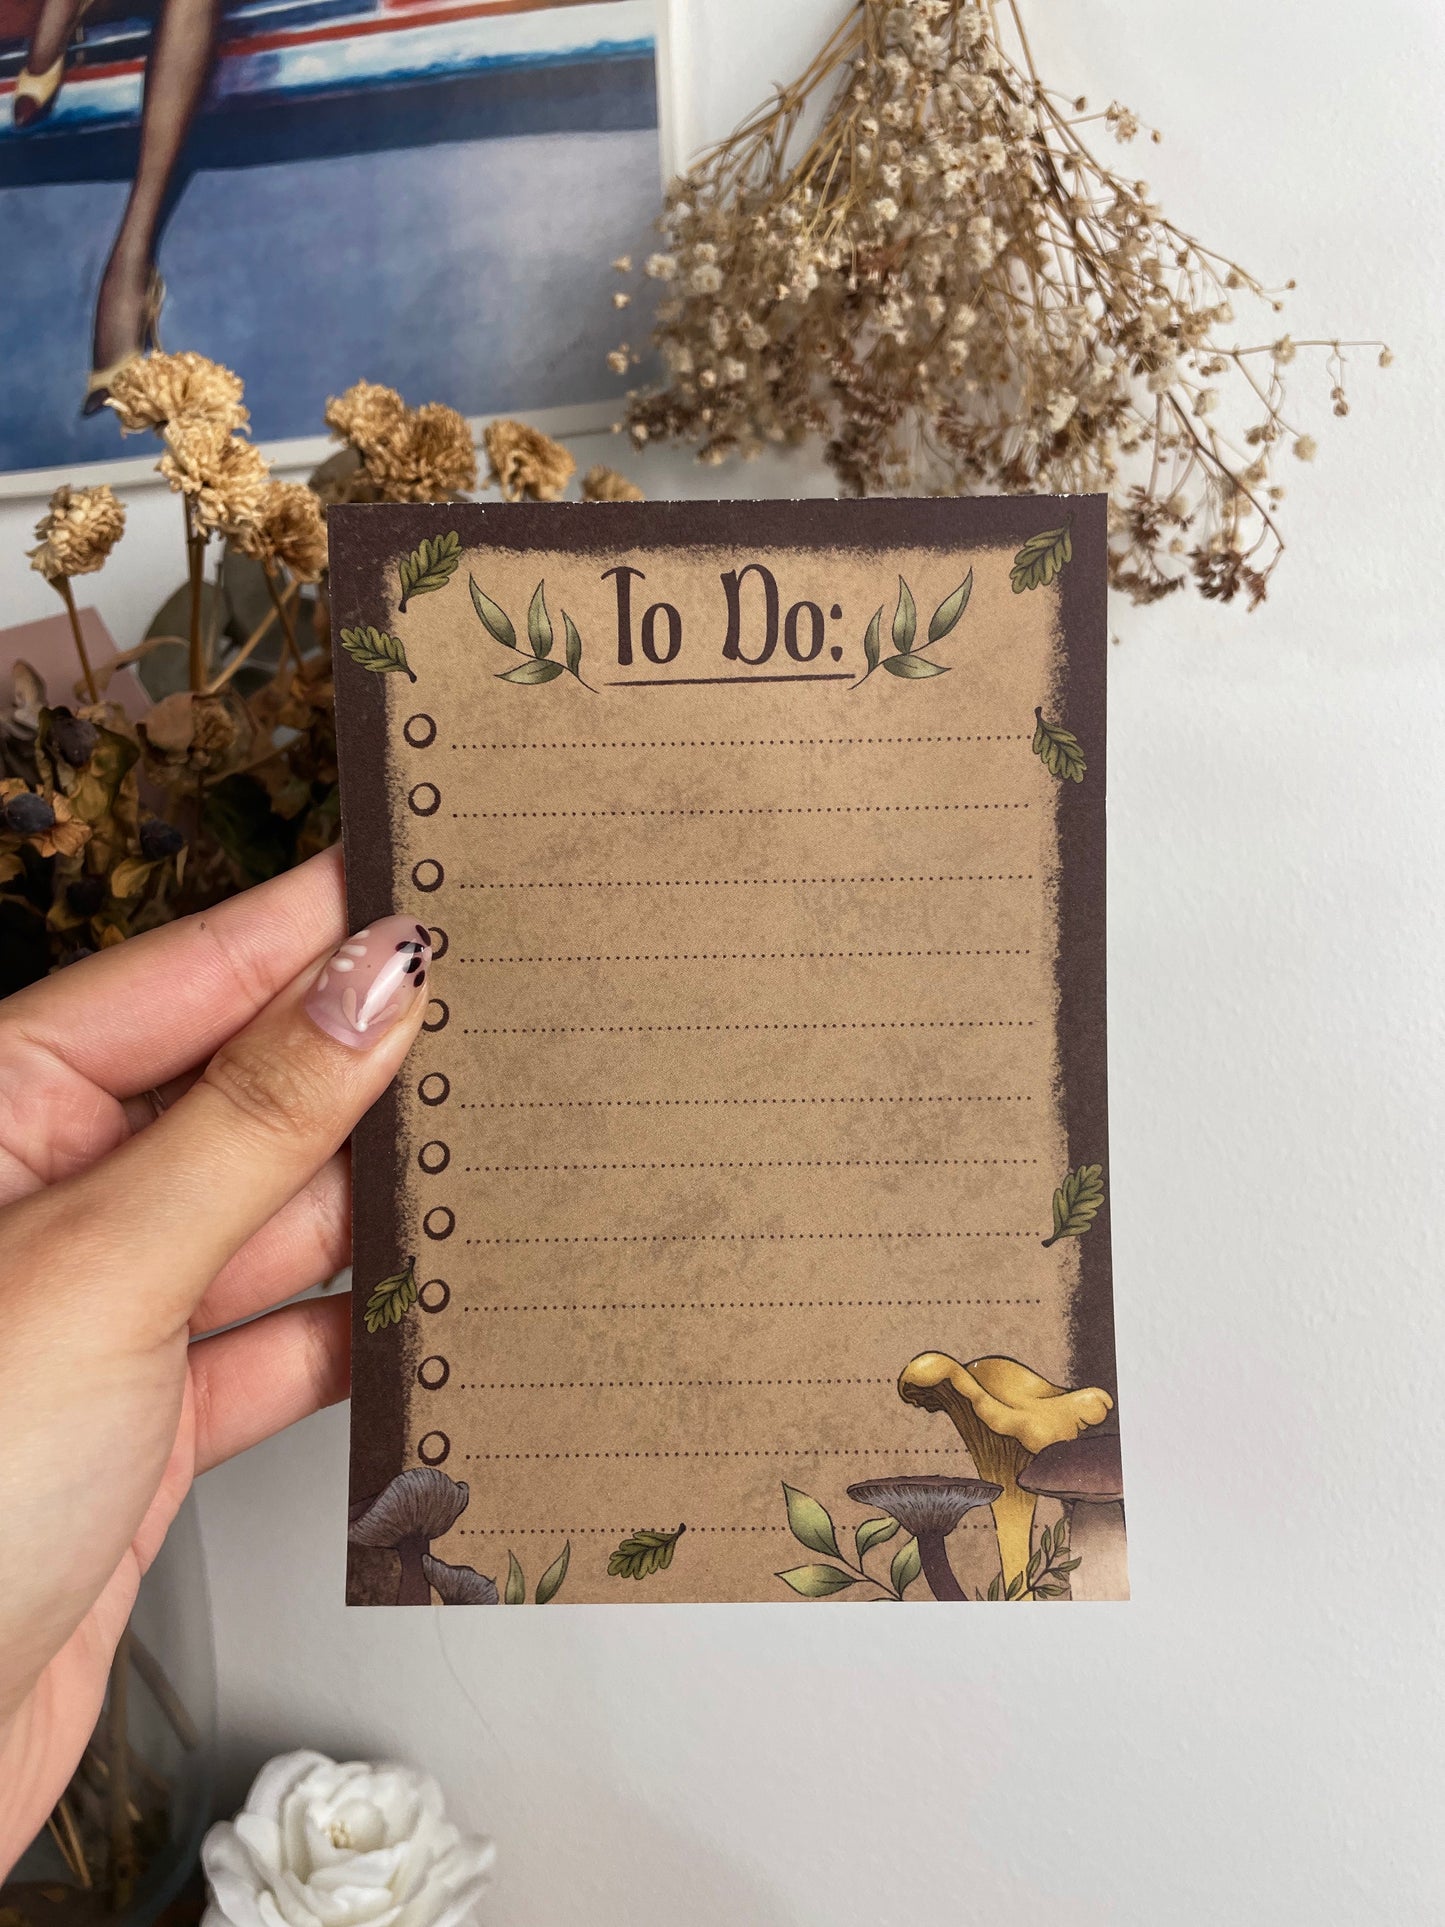 To do list and Dayplanner pack